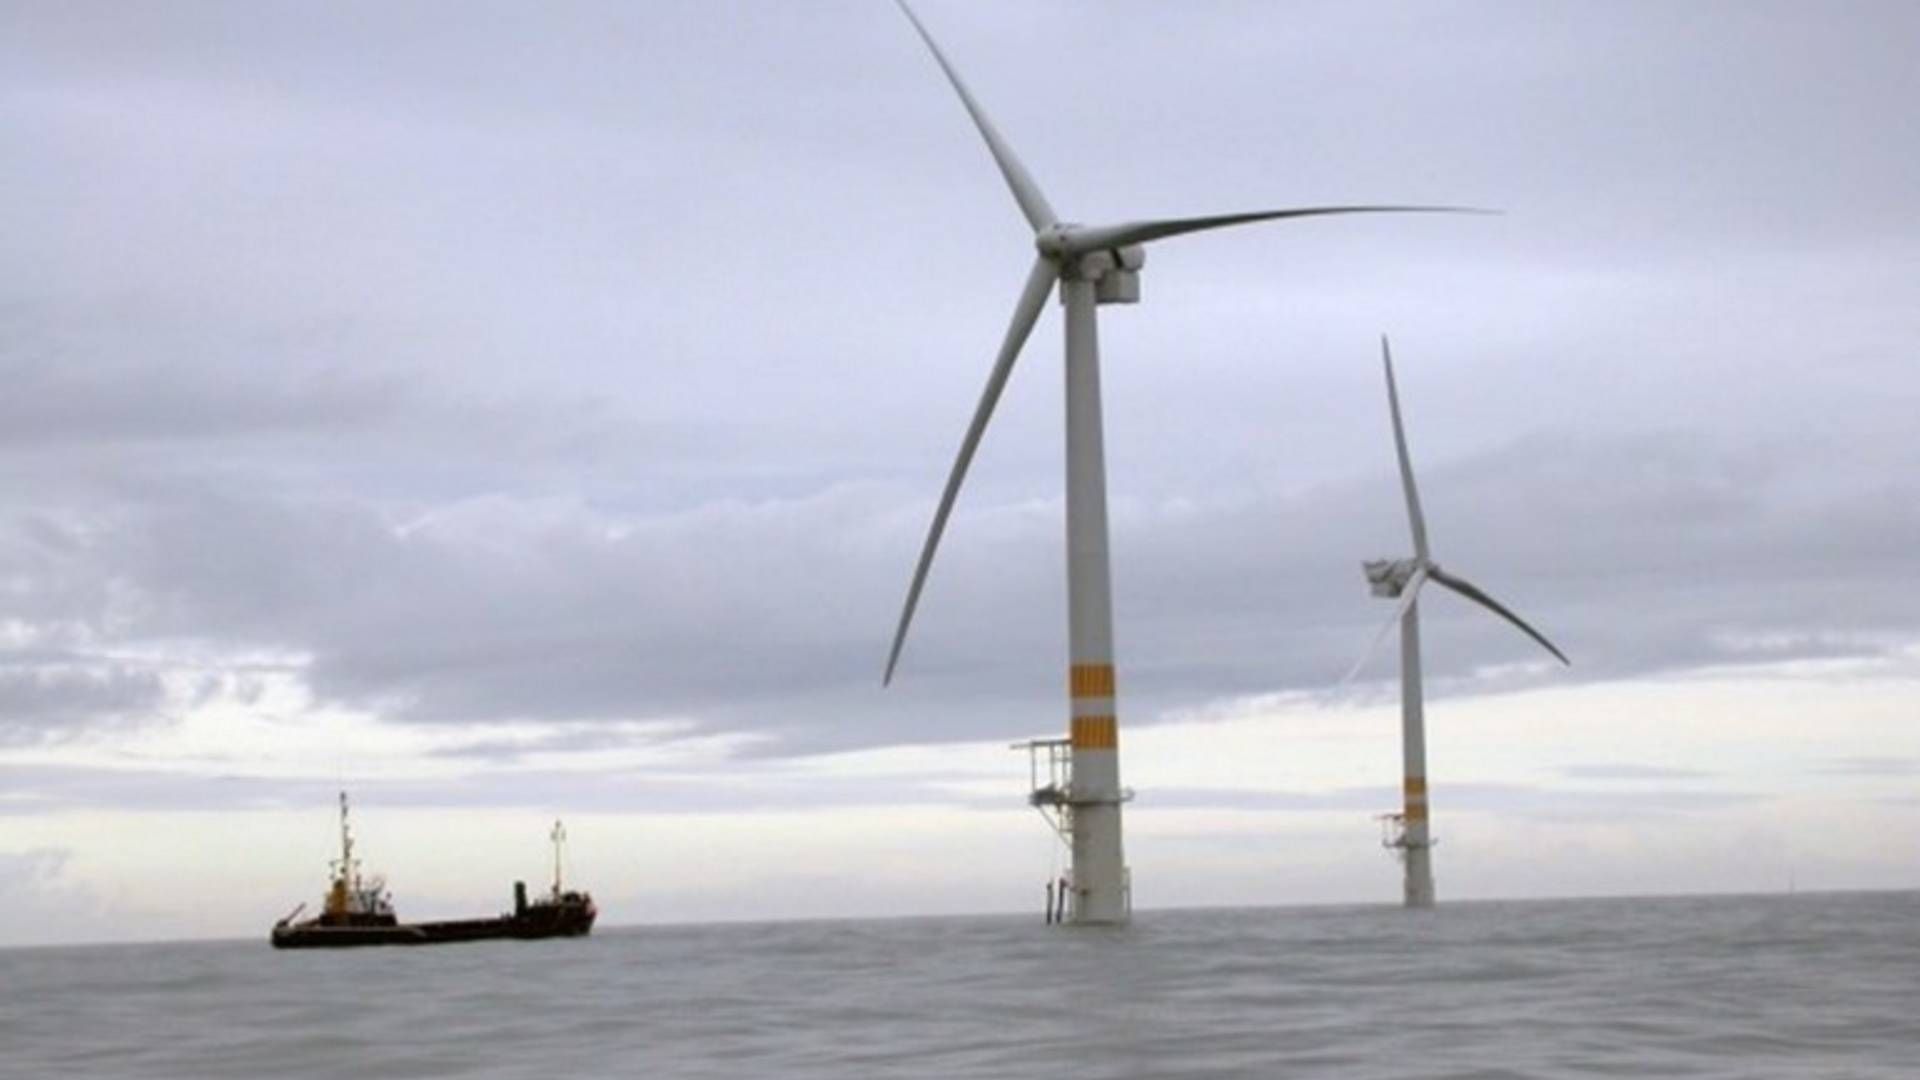 Aging Arklow Bank, originally developed by Enron, is Ireland's only existing offshore wind farm. | Photo: NREL